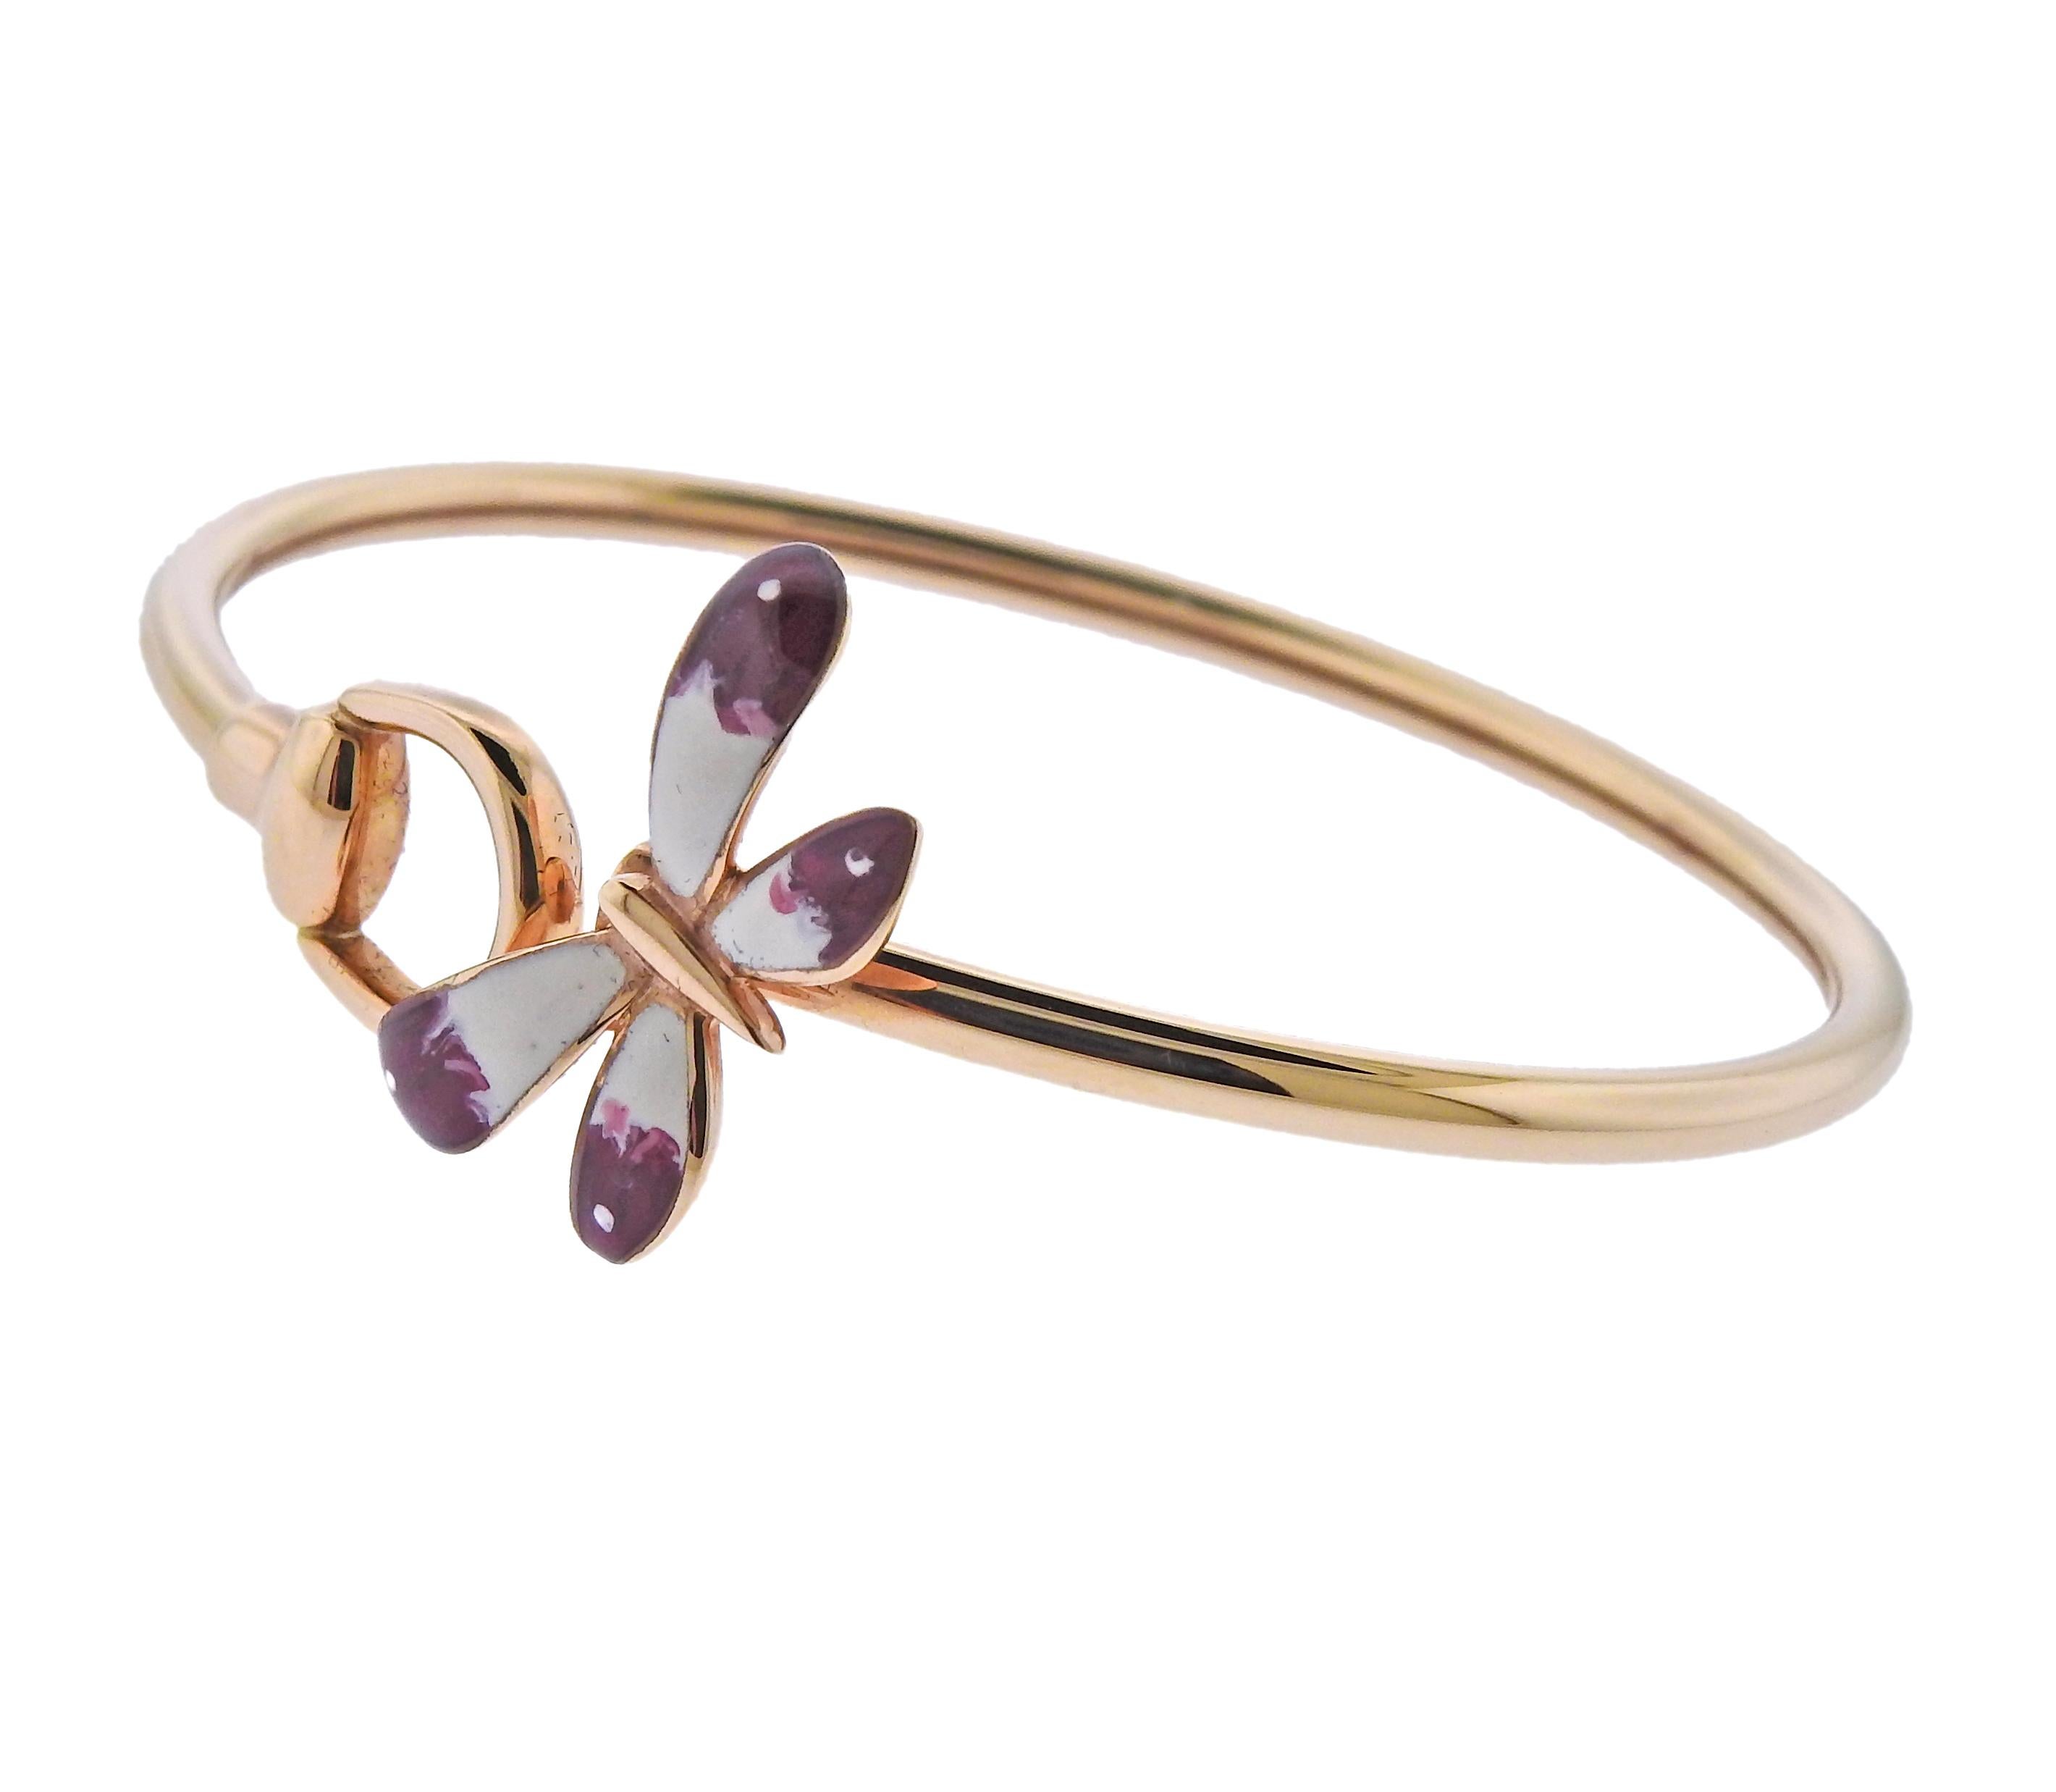 18k Rose gold bracelet crafted by Gucci. Set with enamel on the butterfly. Retail is $2,275.  Inside measures 47mm x 56mm, will comfortably fit 7